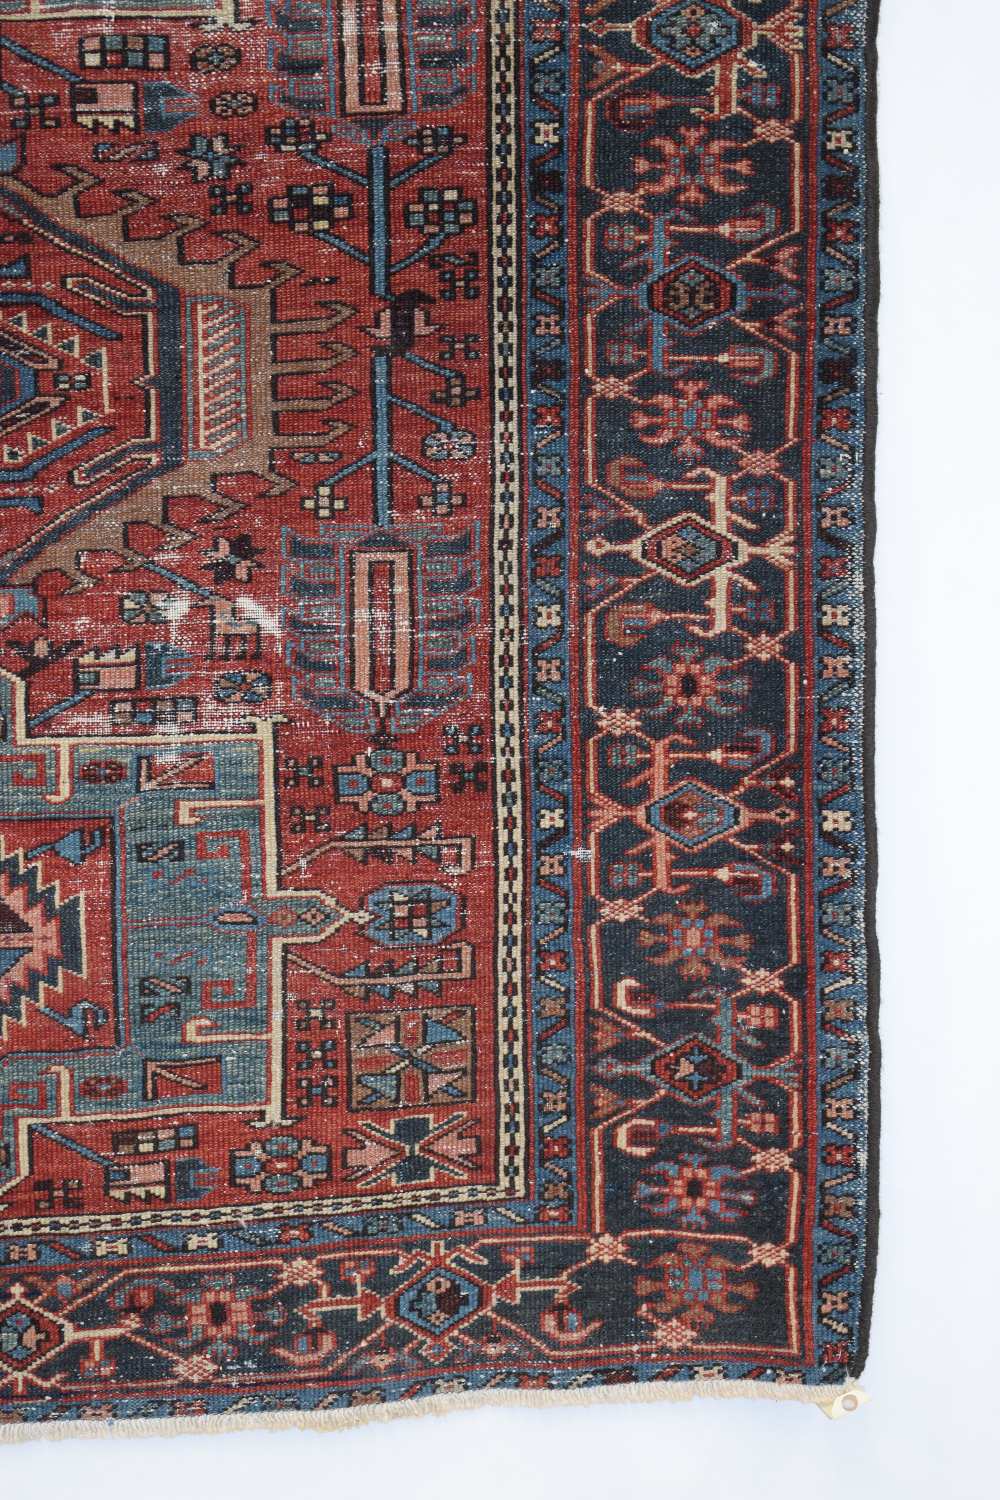 Karaja rug, north west Persia, circa 1930s-40s, 5ft. 11in. X 4ft. 11in. 1.80m. X 1.50m. Overall - Image 2 of 9